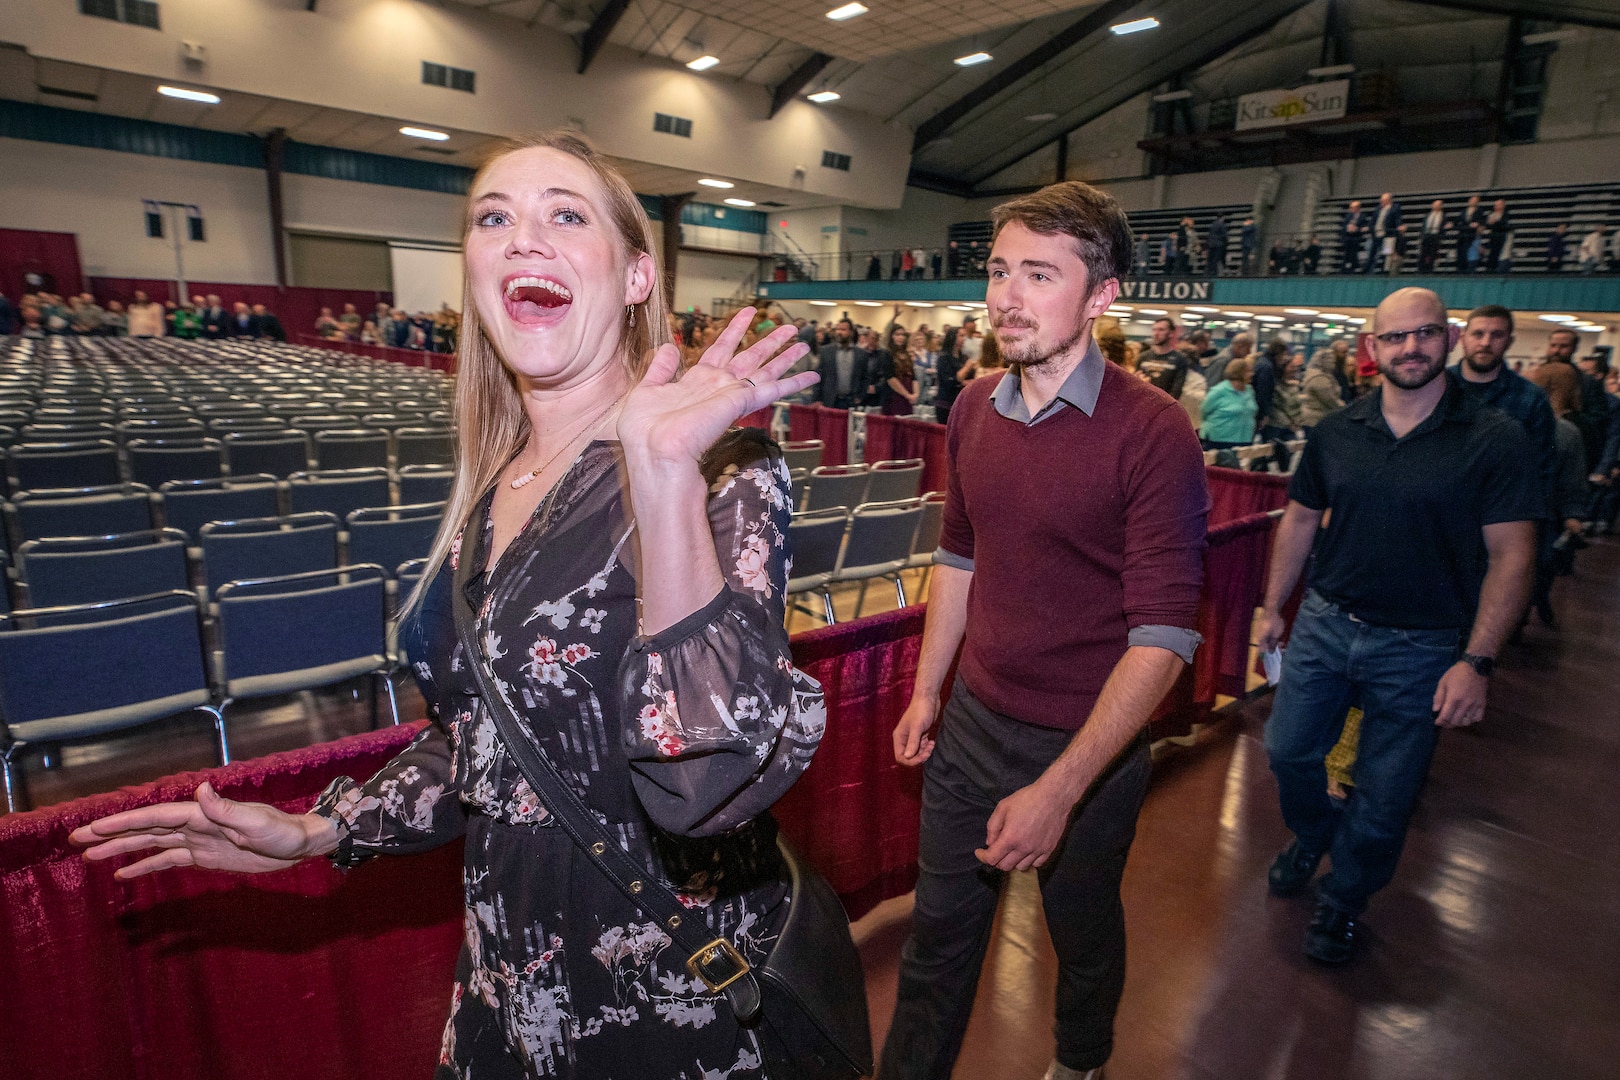 Shop 51 marine electrician Lindsay Noah, left, waves to friends and family members as she and her classmates enter the auditorium during 2019 PSNS & IMF Apprentice Graduation ceremony Friday, Nov. 8 at the Kitsap County Fairgrounds Kitsap Sun Pavilion.